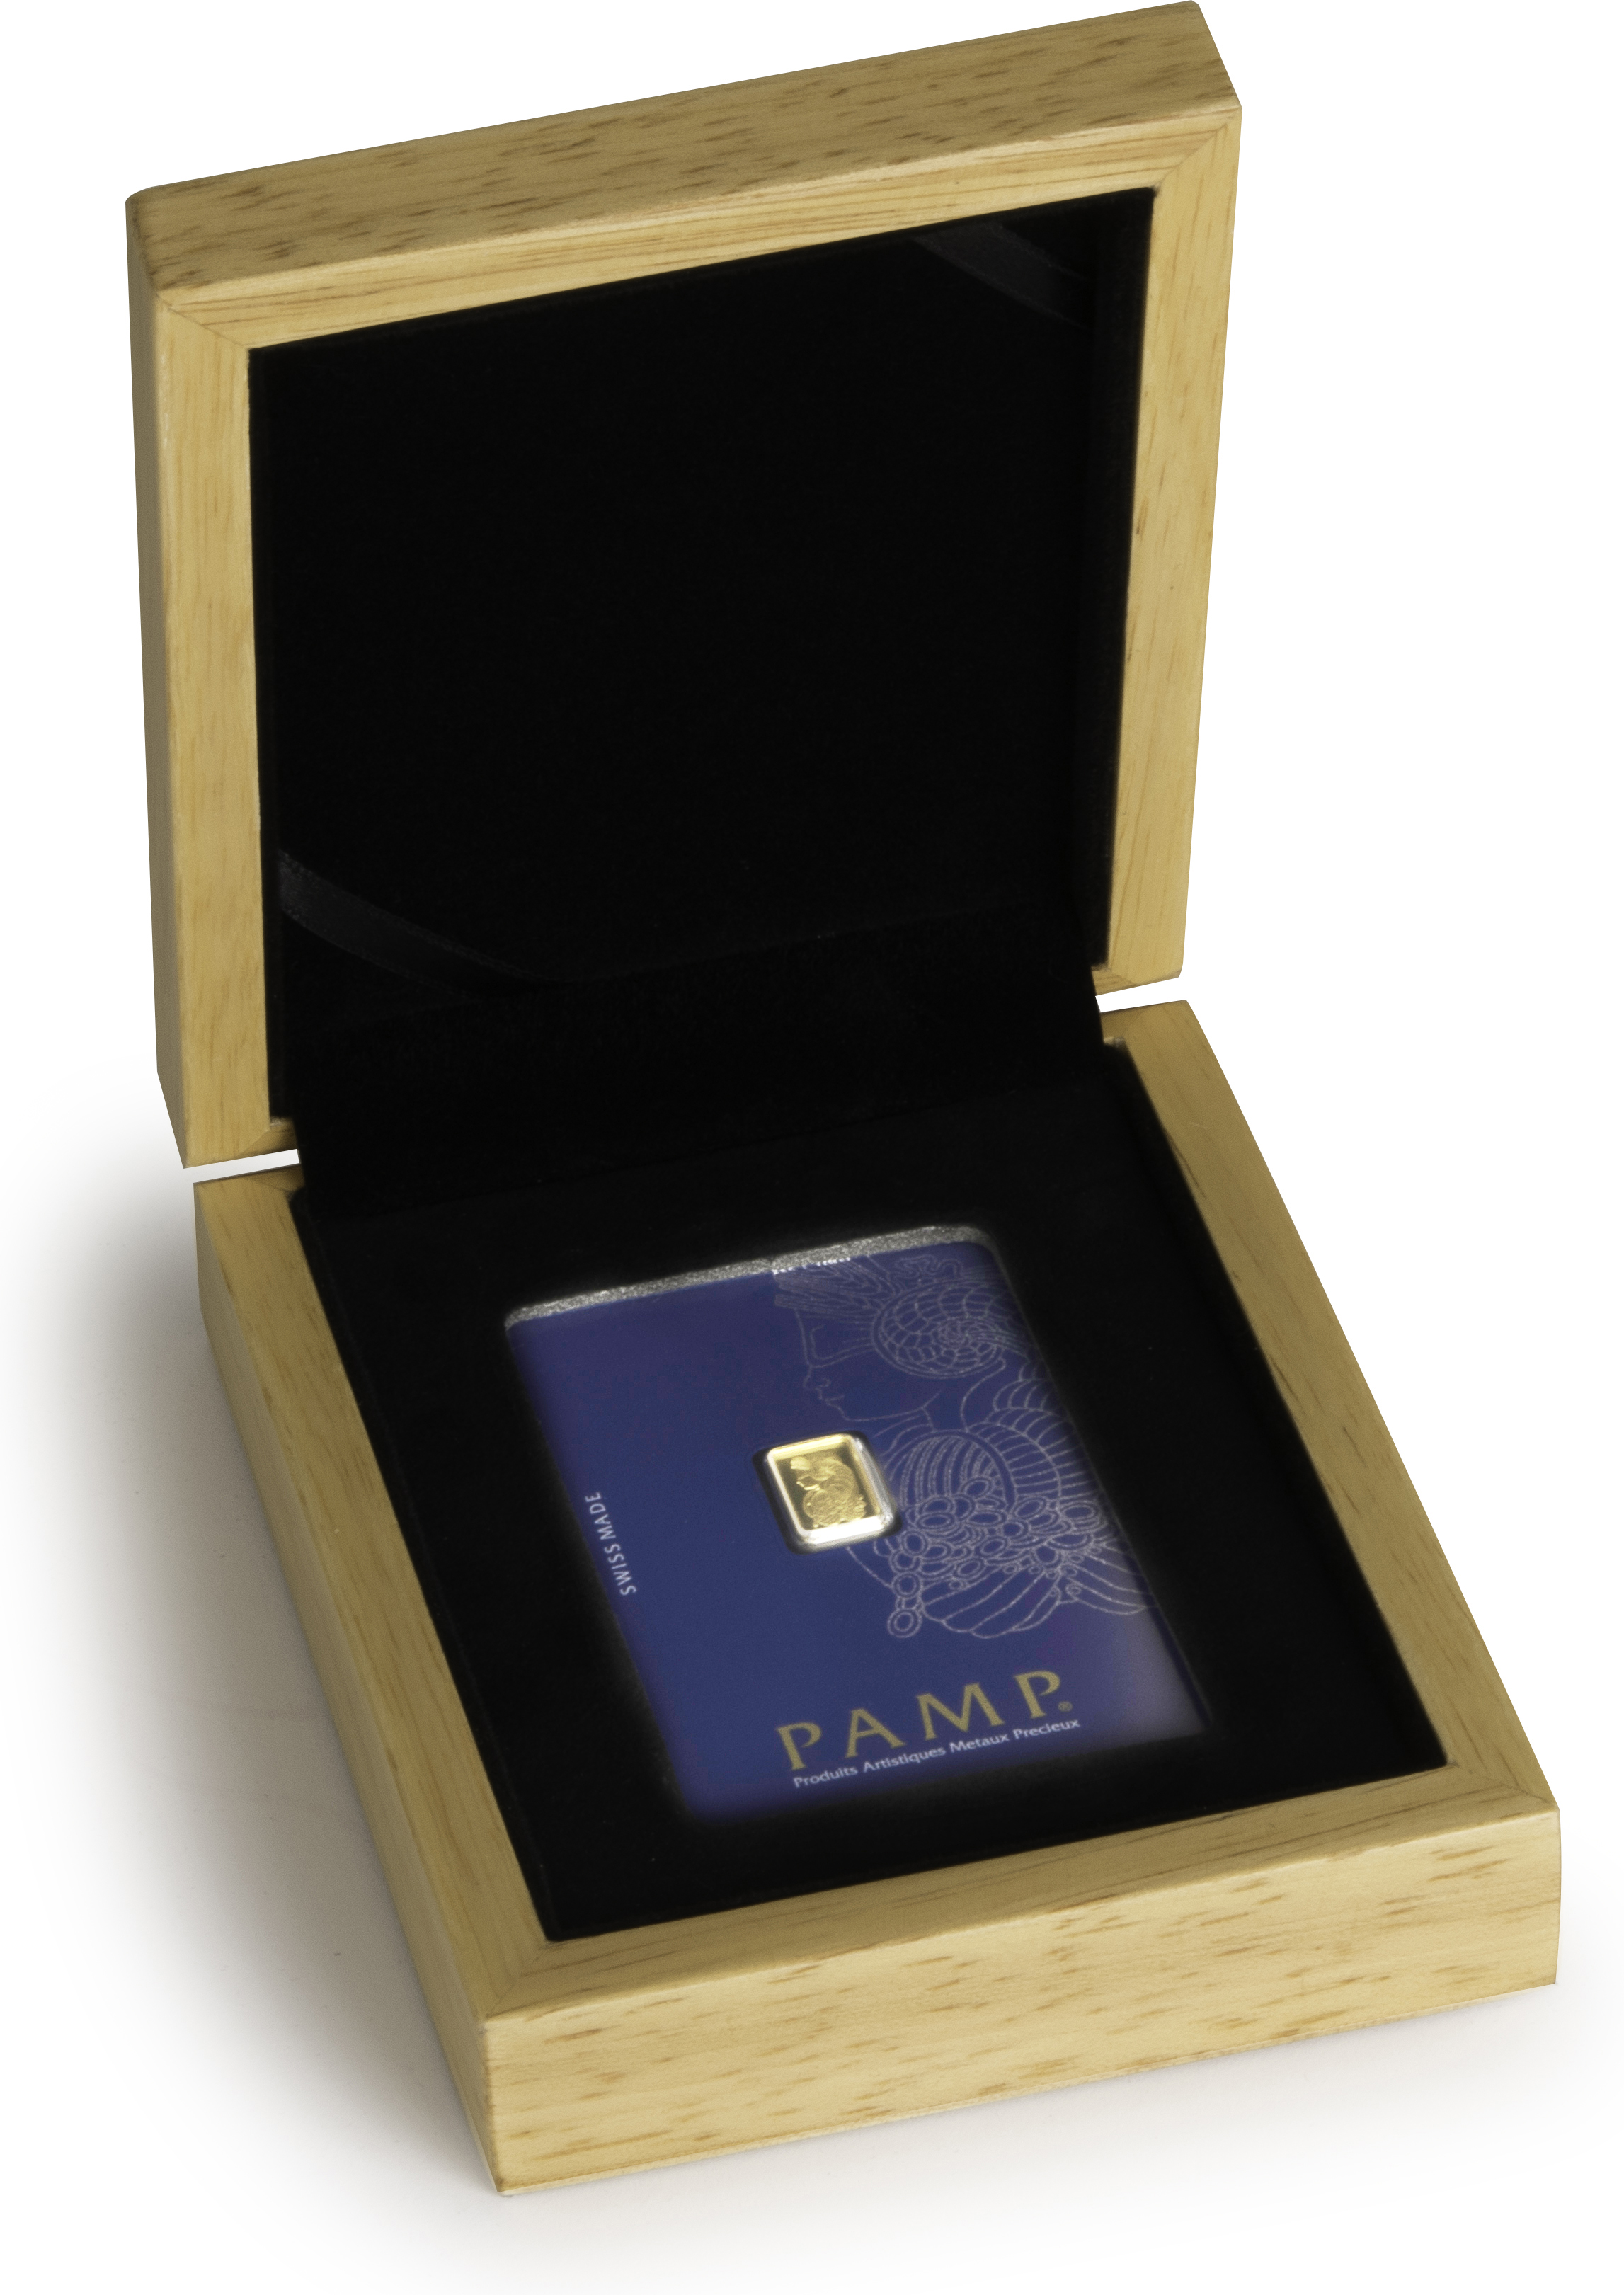 PAMP 1g Gold Bar in Gift Box | BullionByPost - From £62